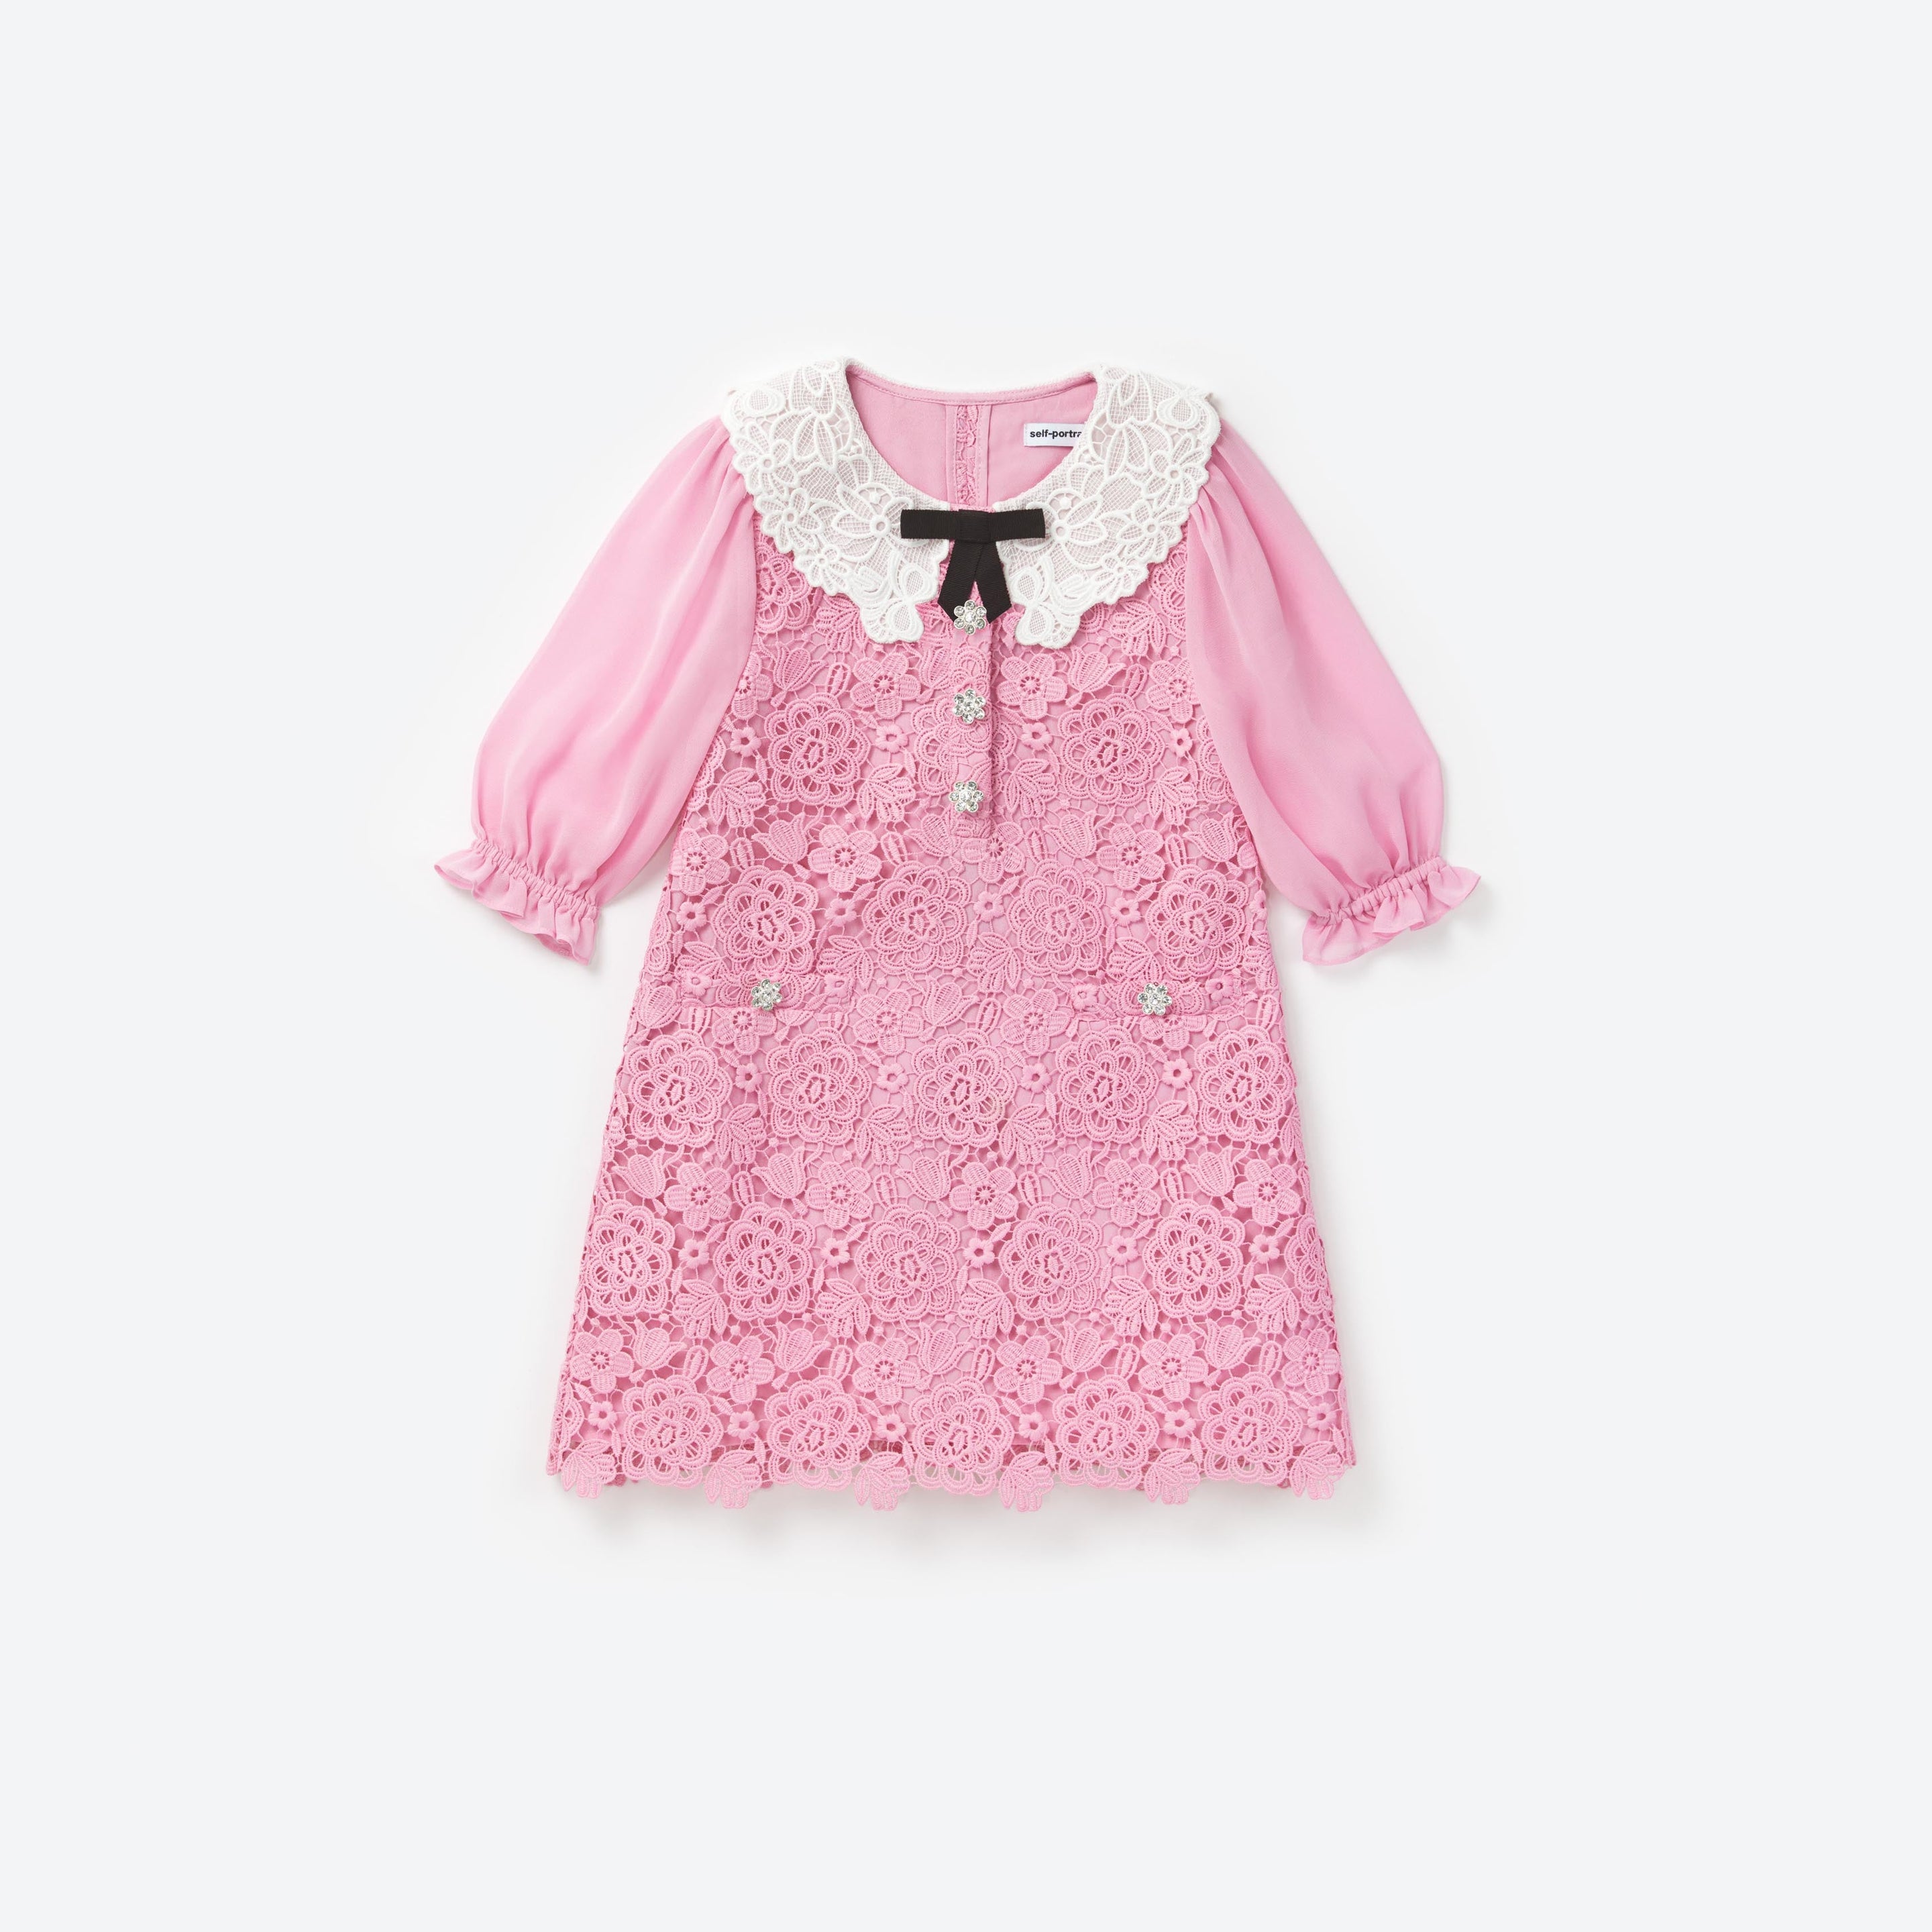 Self-Portrait Girl's Tiered Lace Collar Cotton Dress, Size 3T-12